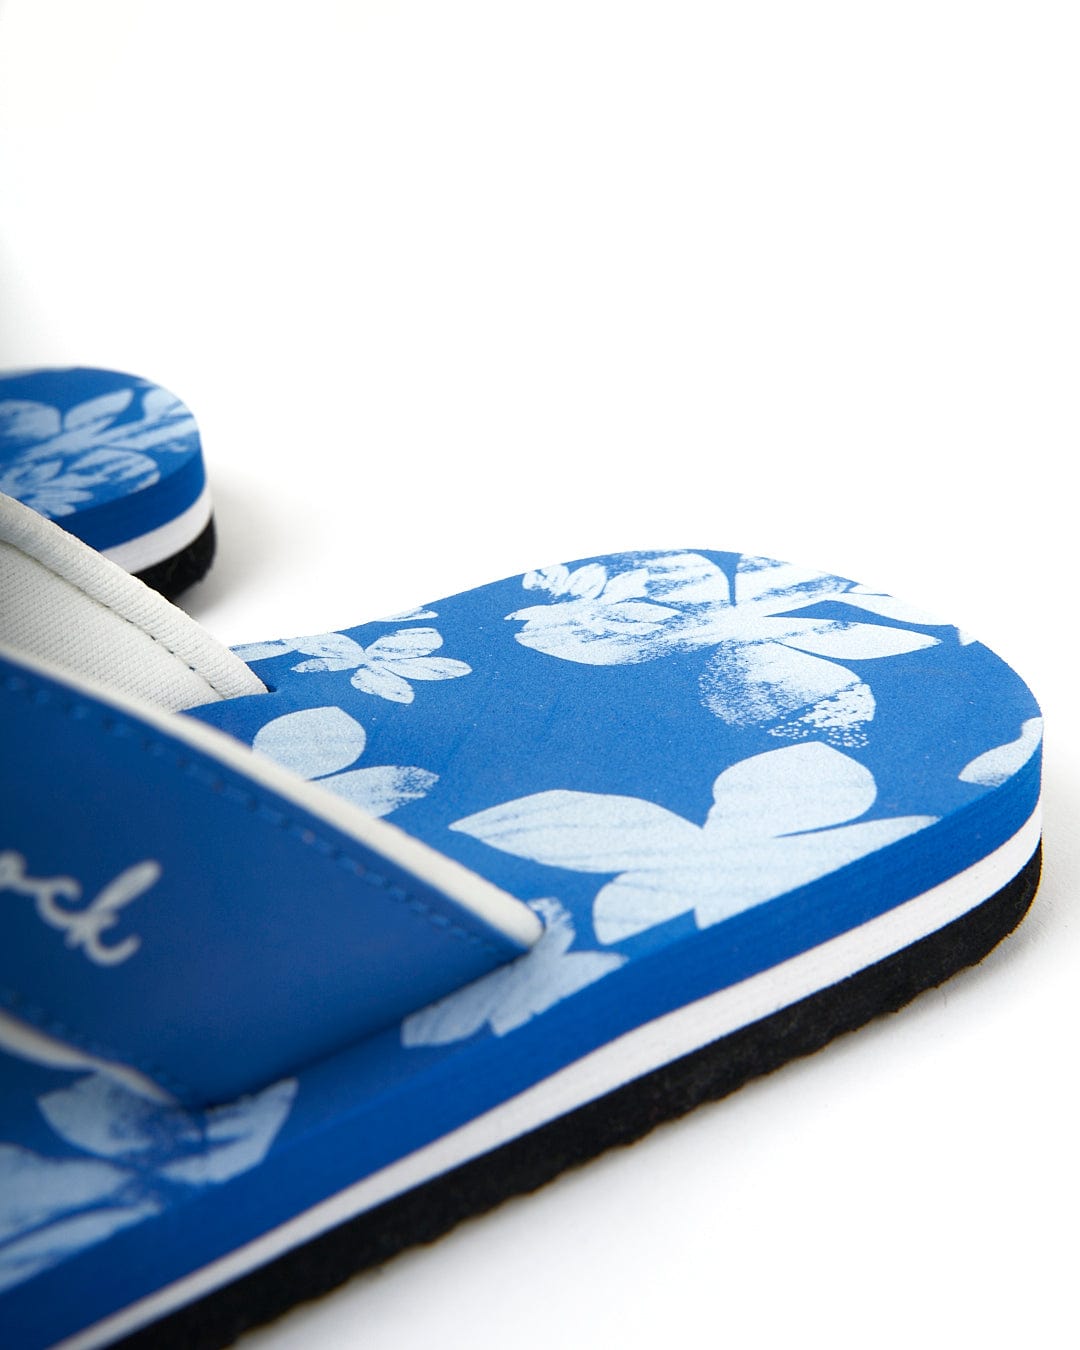 A pair of blue Saltrock Floral - Womens Flip Flops adorned with delicate white flowers.